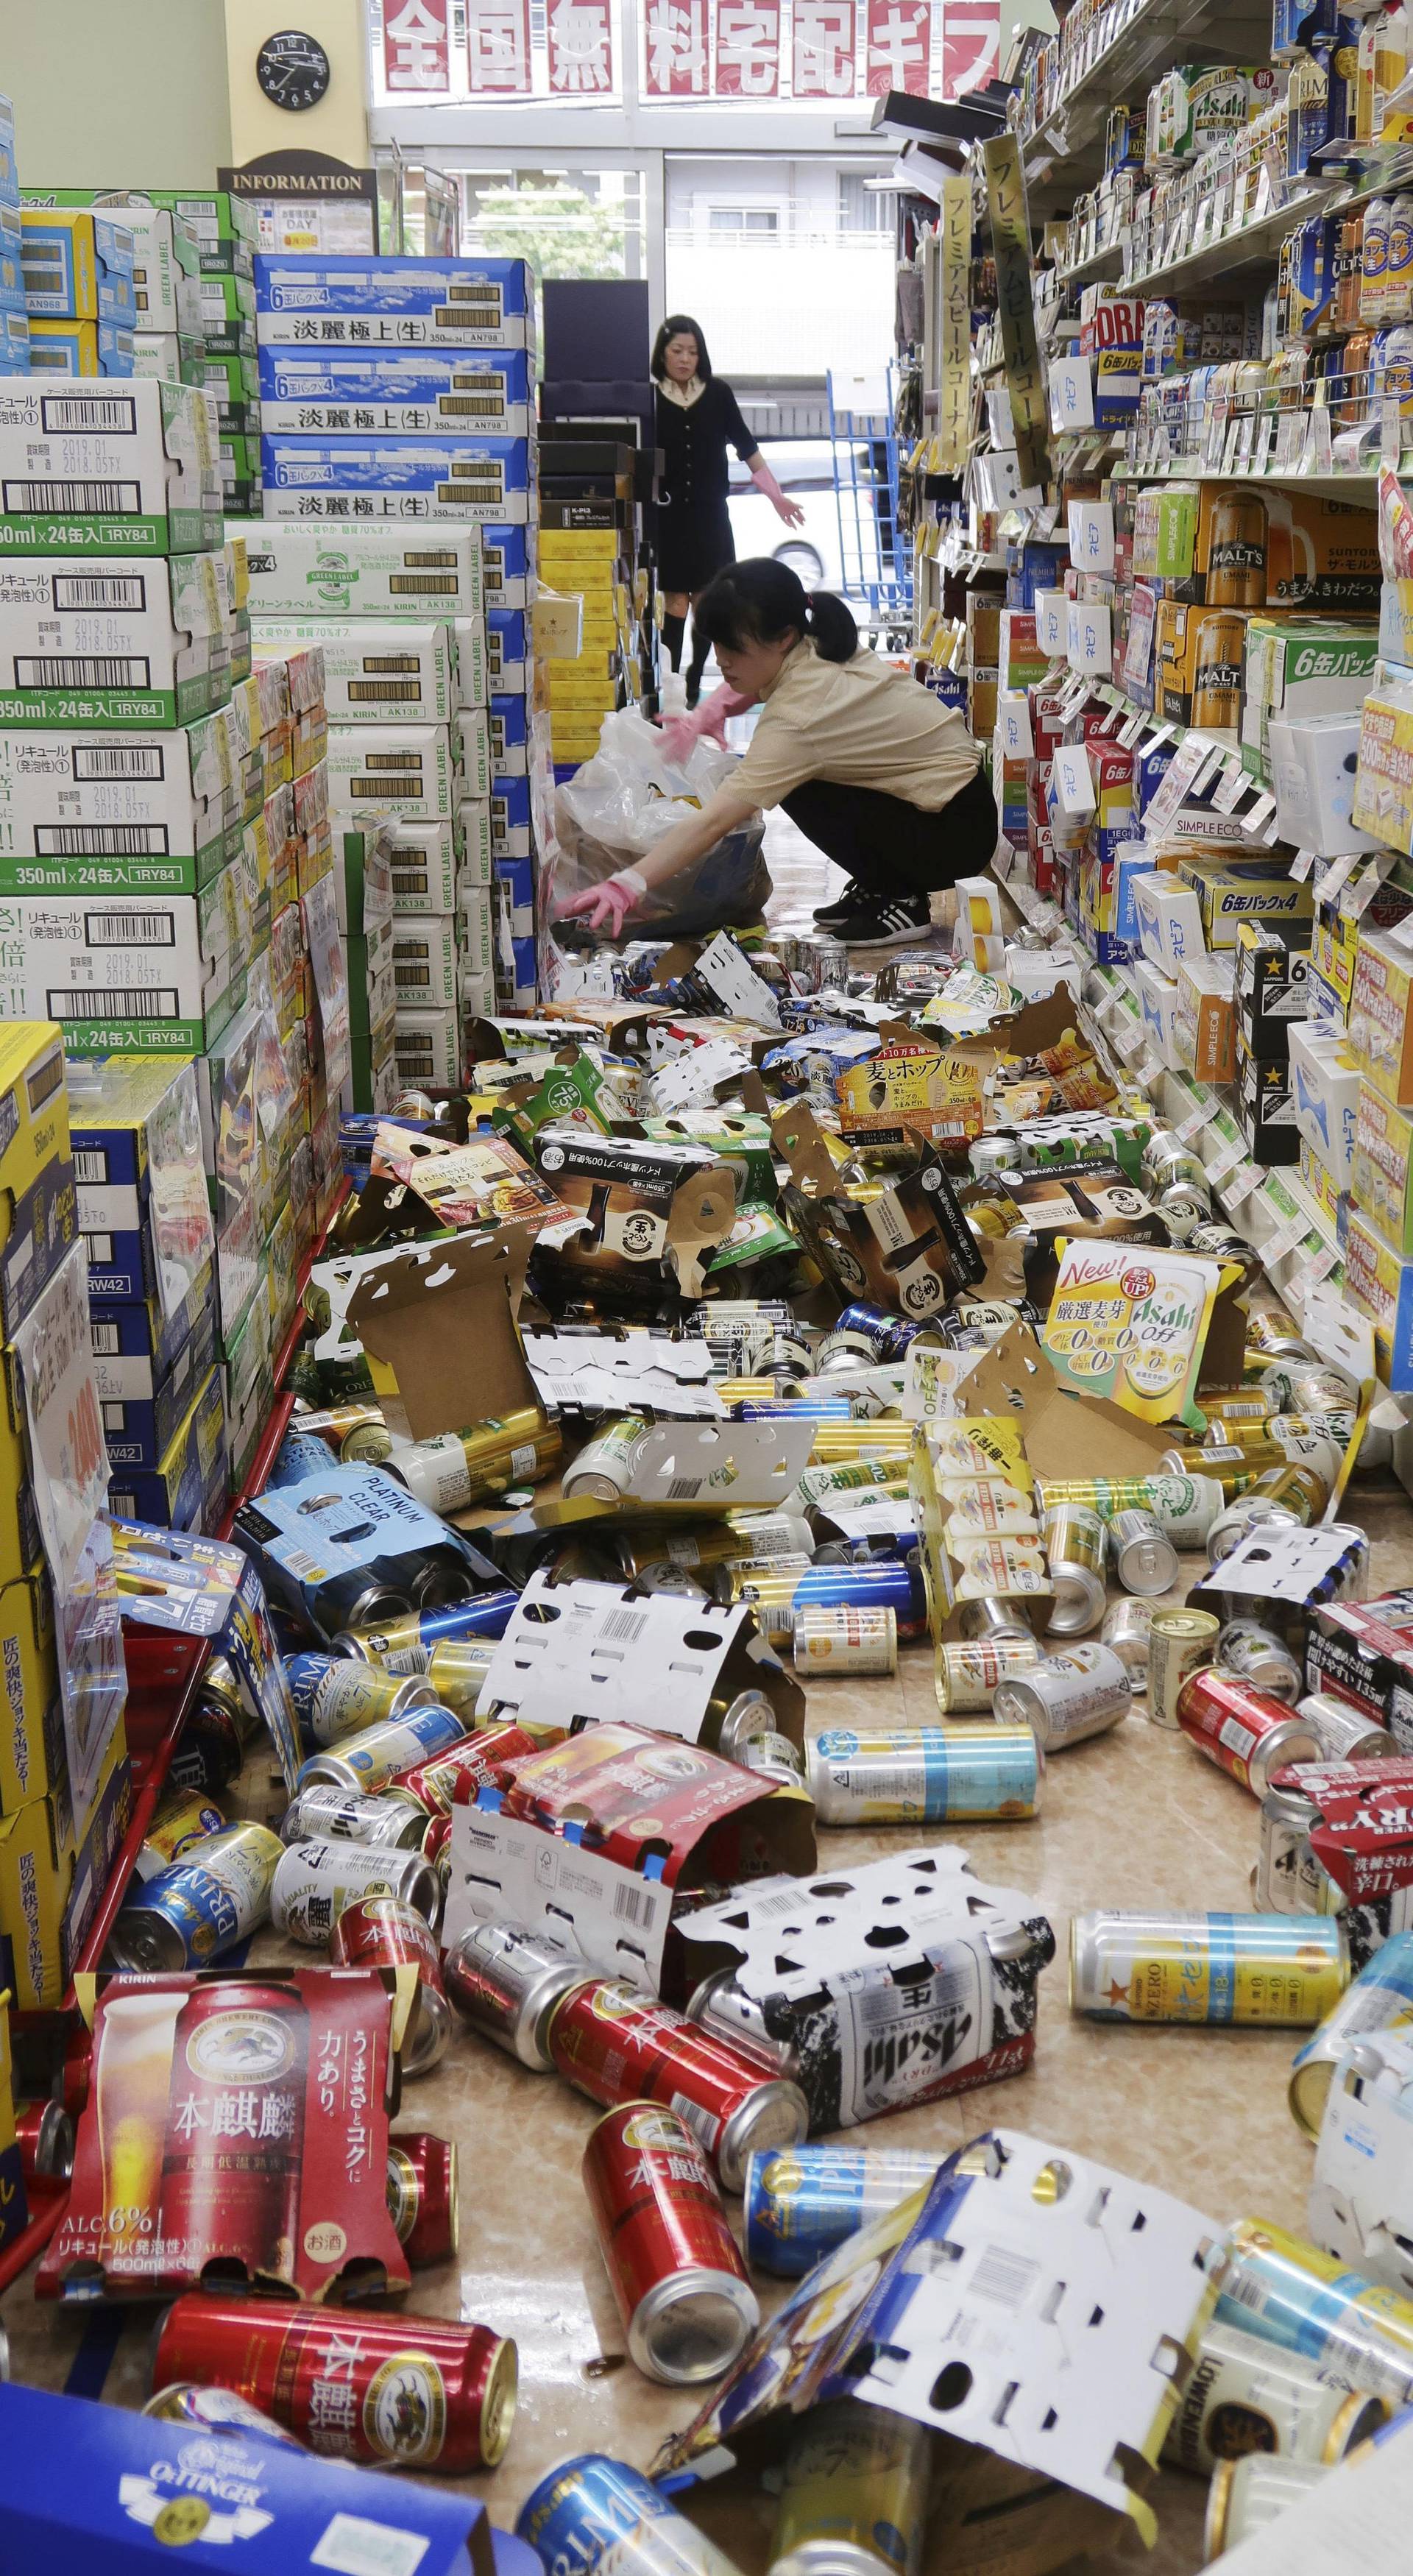 Employees try to remove bottles and cans of beverages which are scattered by an earthquake at a liquor shop in Hirakata